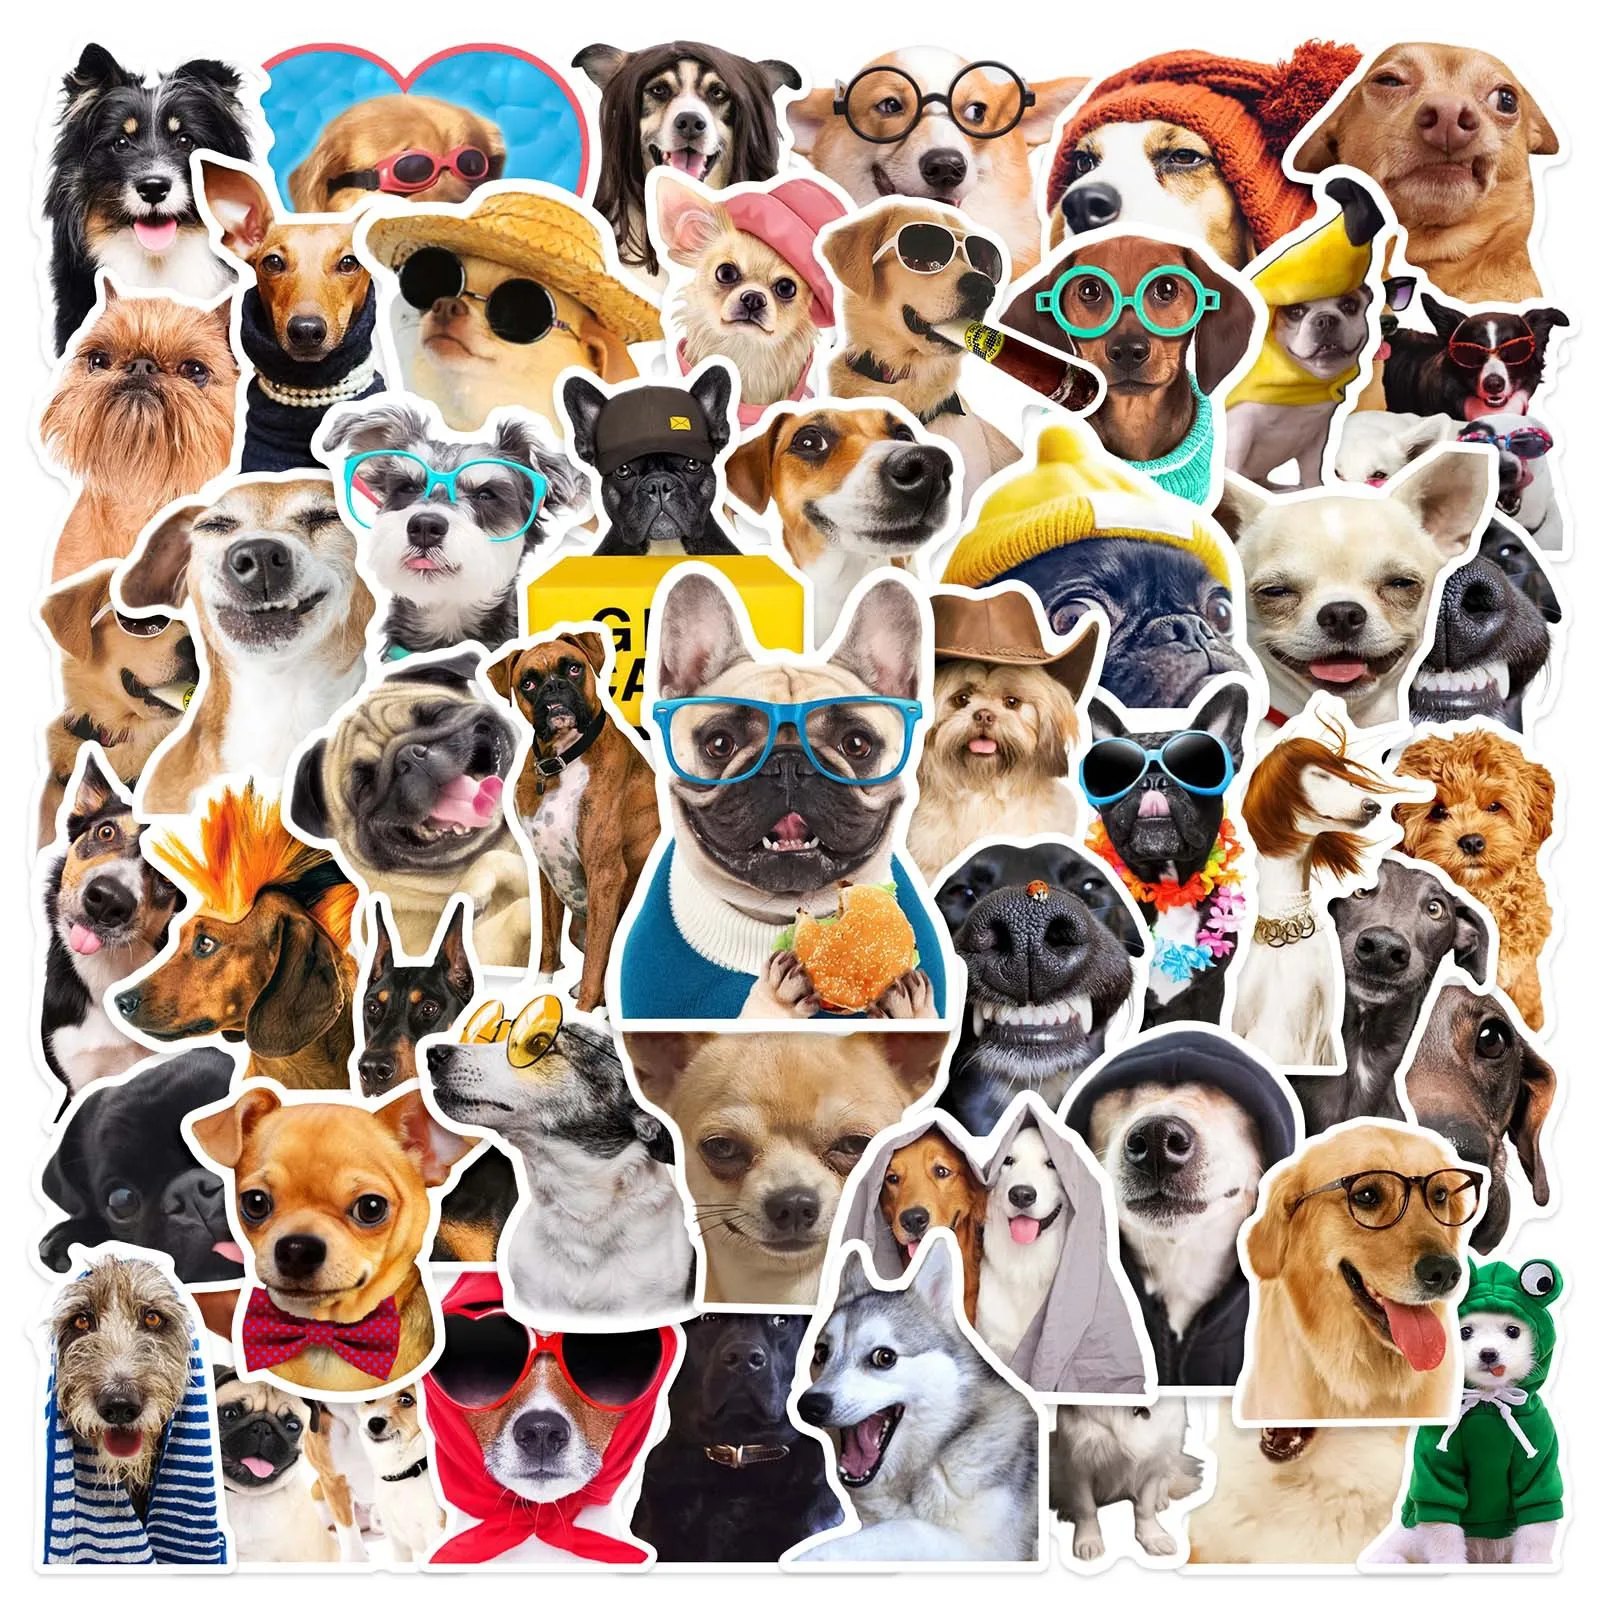 10/30/50pcs Funny Cool  Dog Graffiti Sticker Water Cup Mobile Phone Tablet Luggage Guitar Speaker Helmet Diy Waterproof Sticker 10 30 50pcs racing graffiti stickers suitcases laptops mobile phone guitar water cup car motorcycle helmet water proof stickers